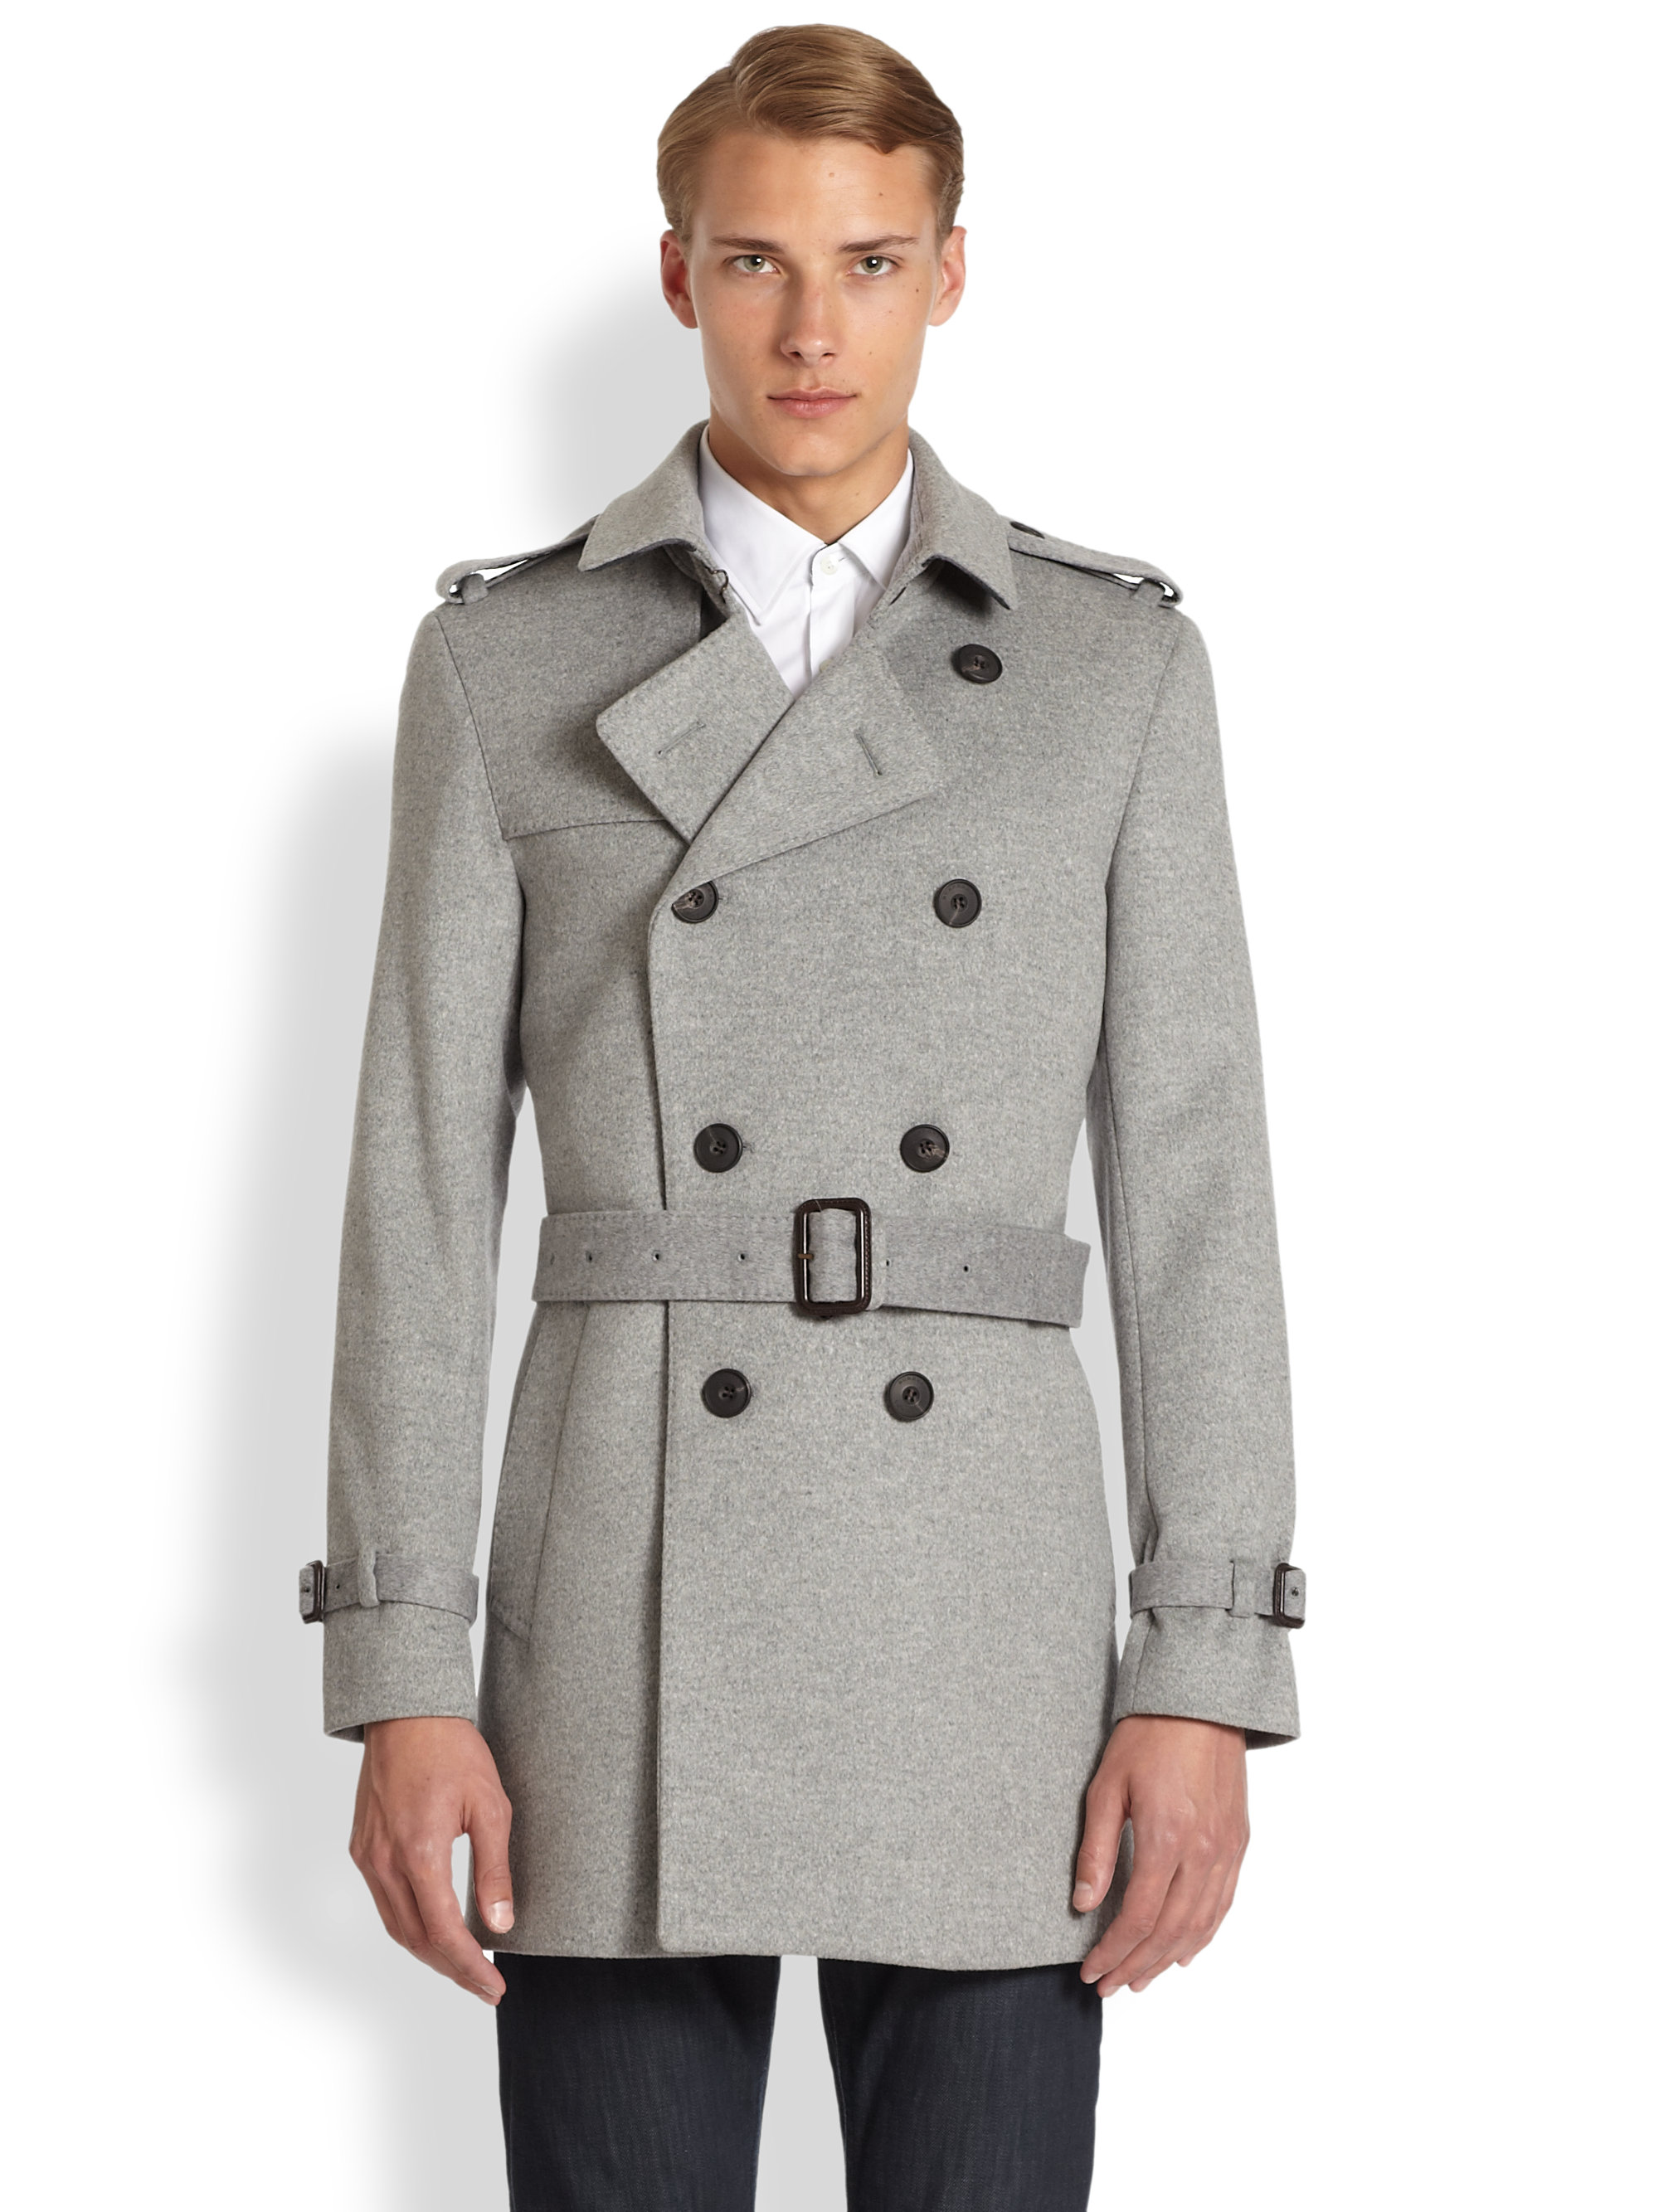 Lyst - Burberry Britton Wool/cashmere Trench Coat in Gray